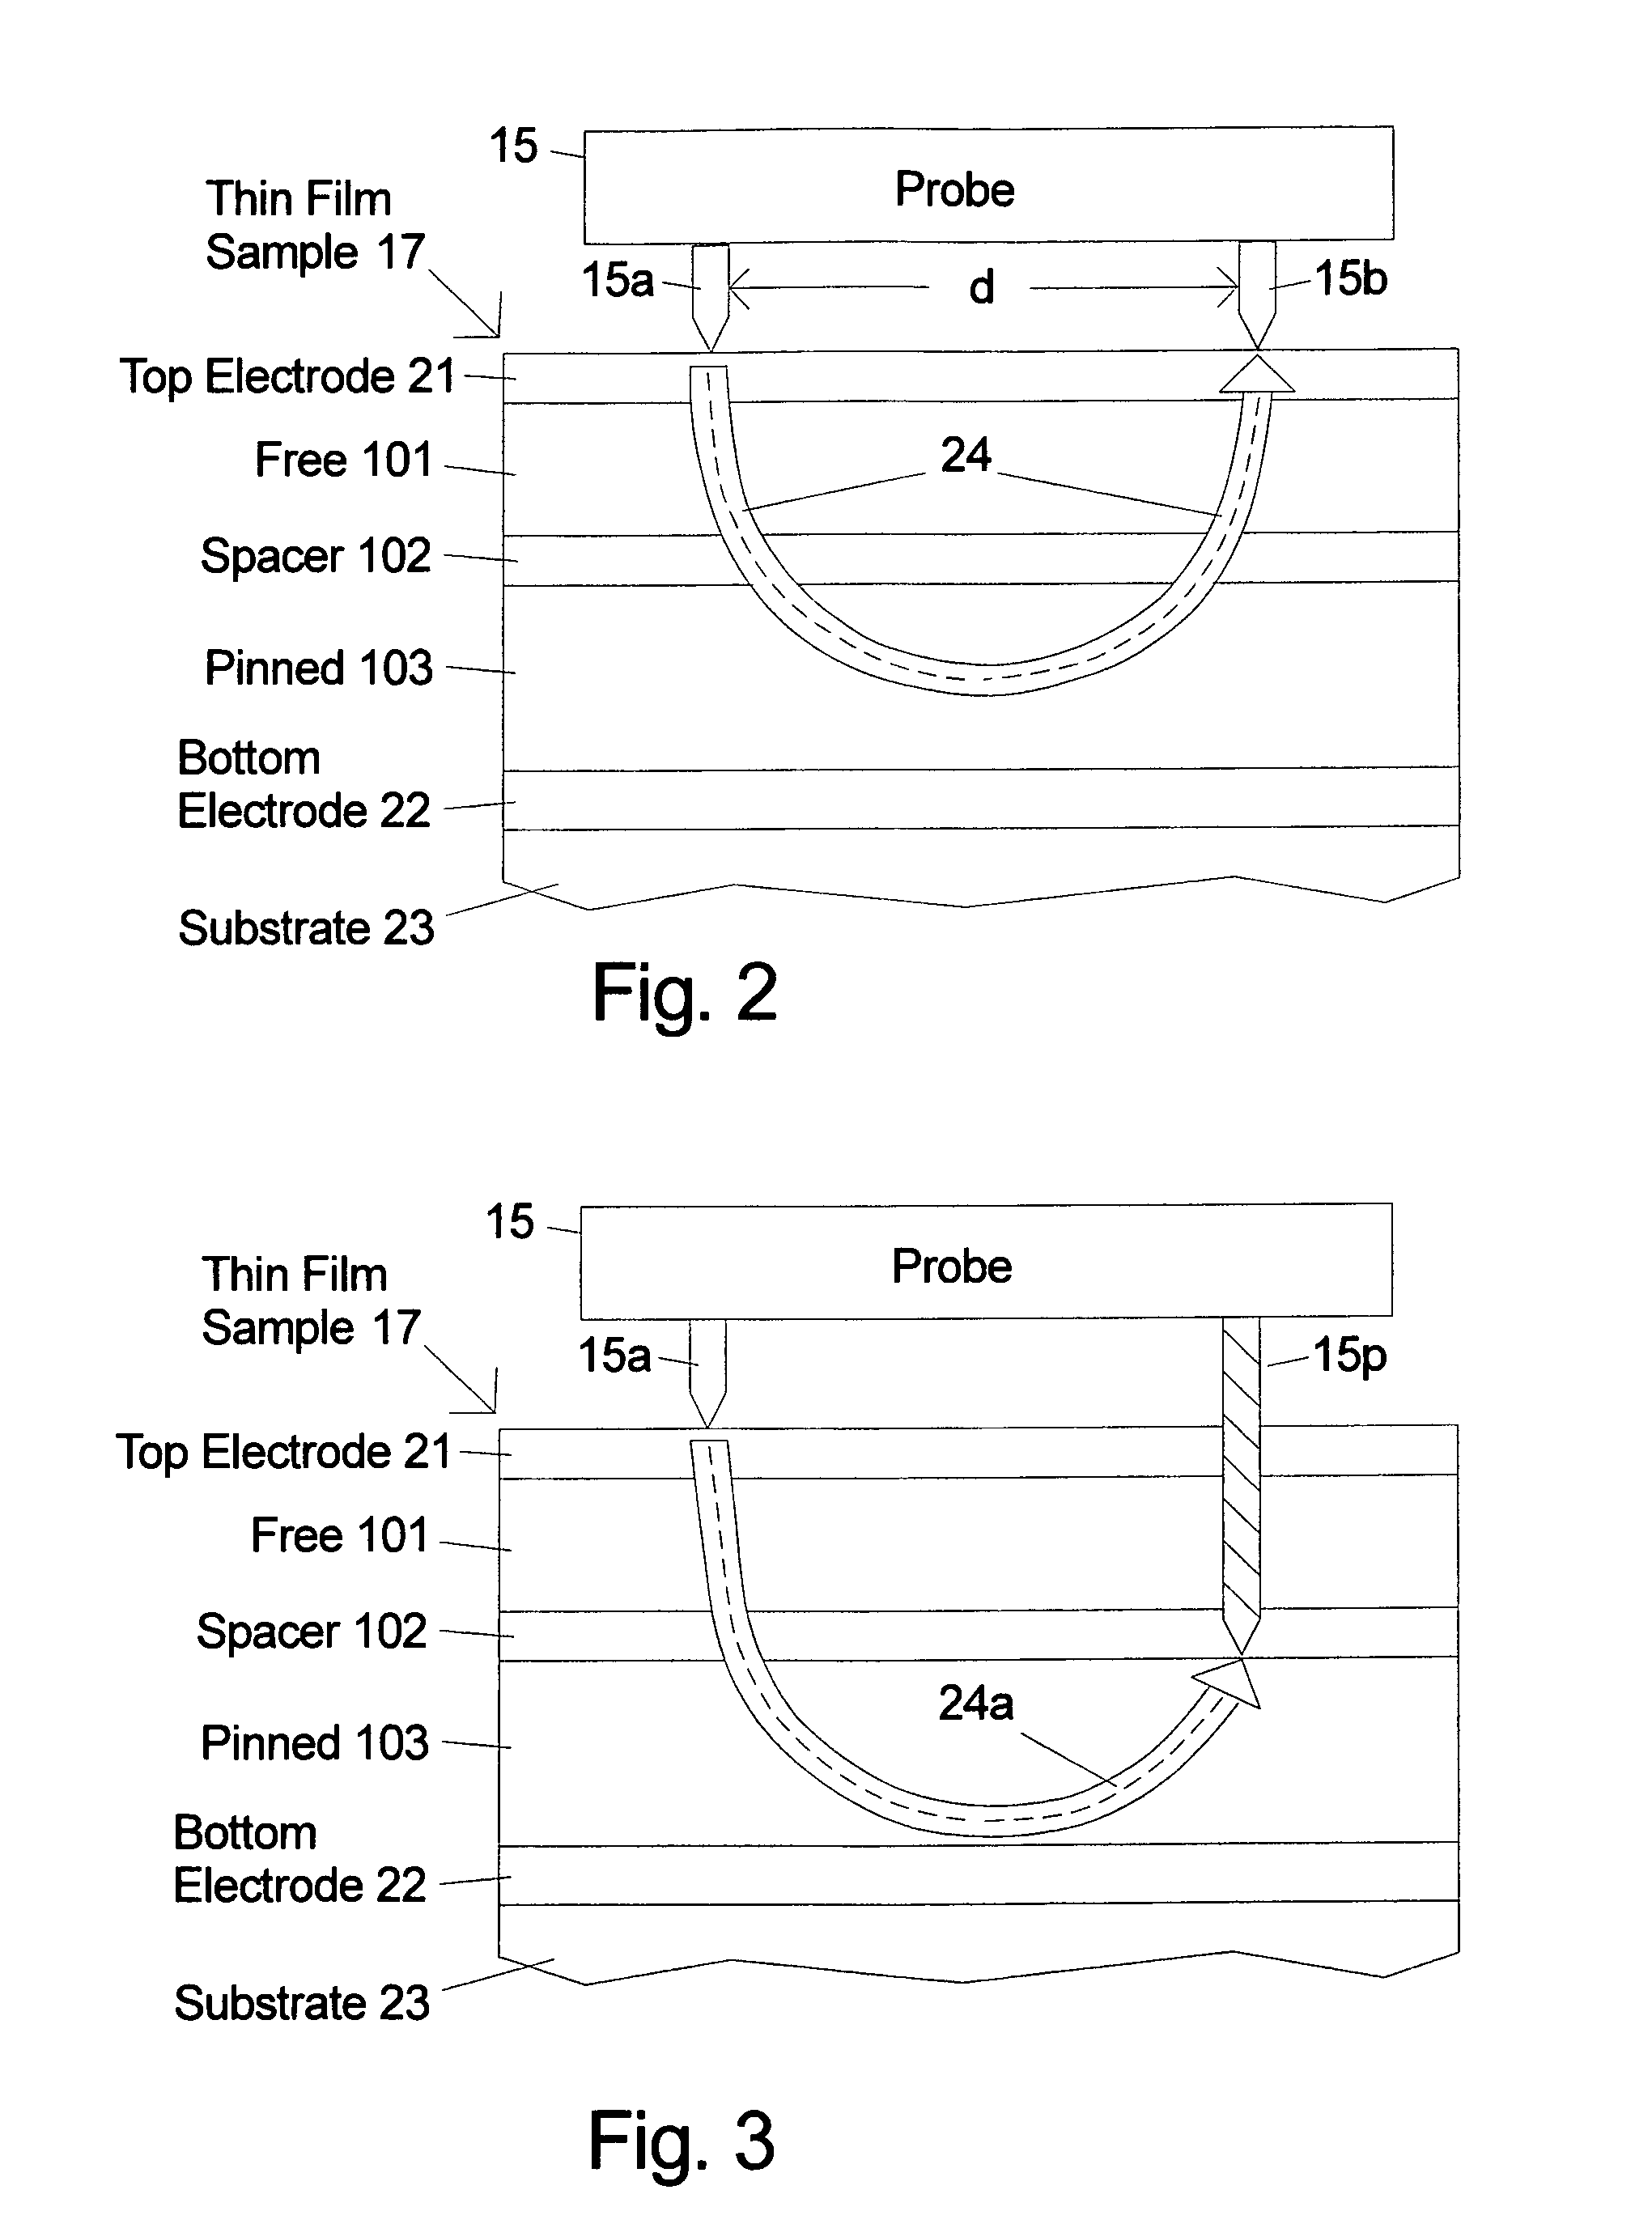 Method and apparatus for measuring magnetic parameters of magnetic thin film structures